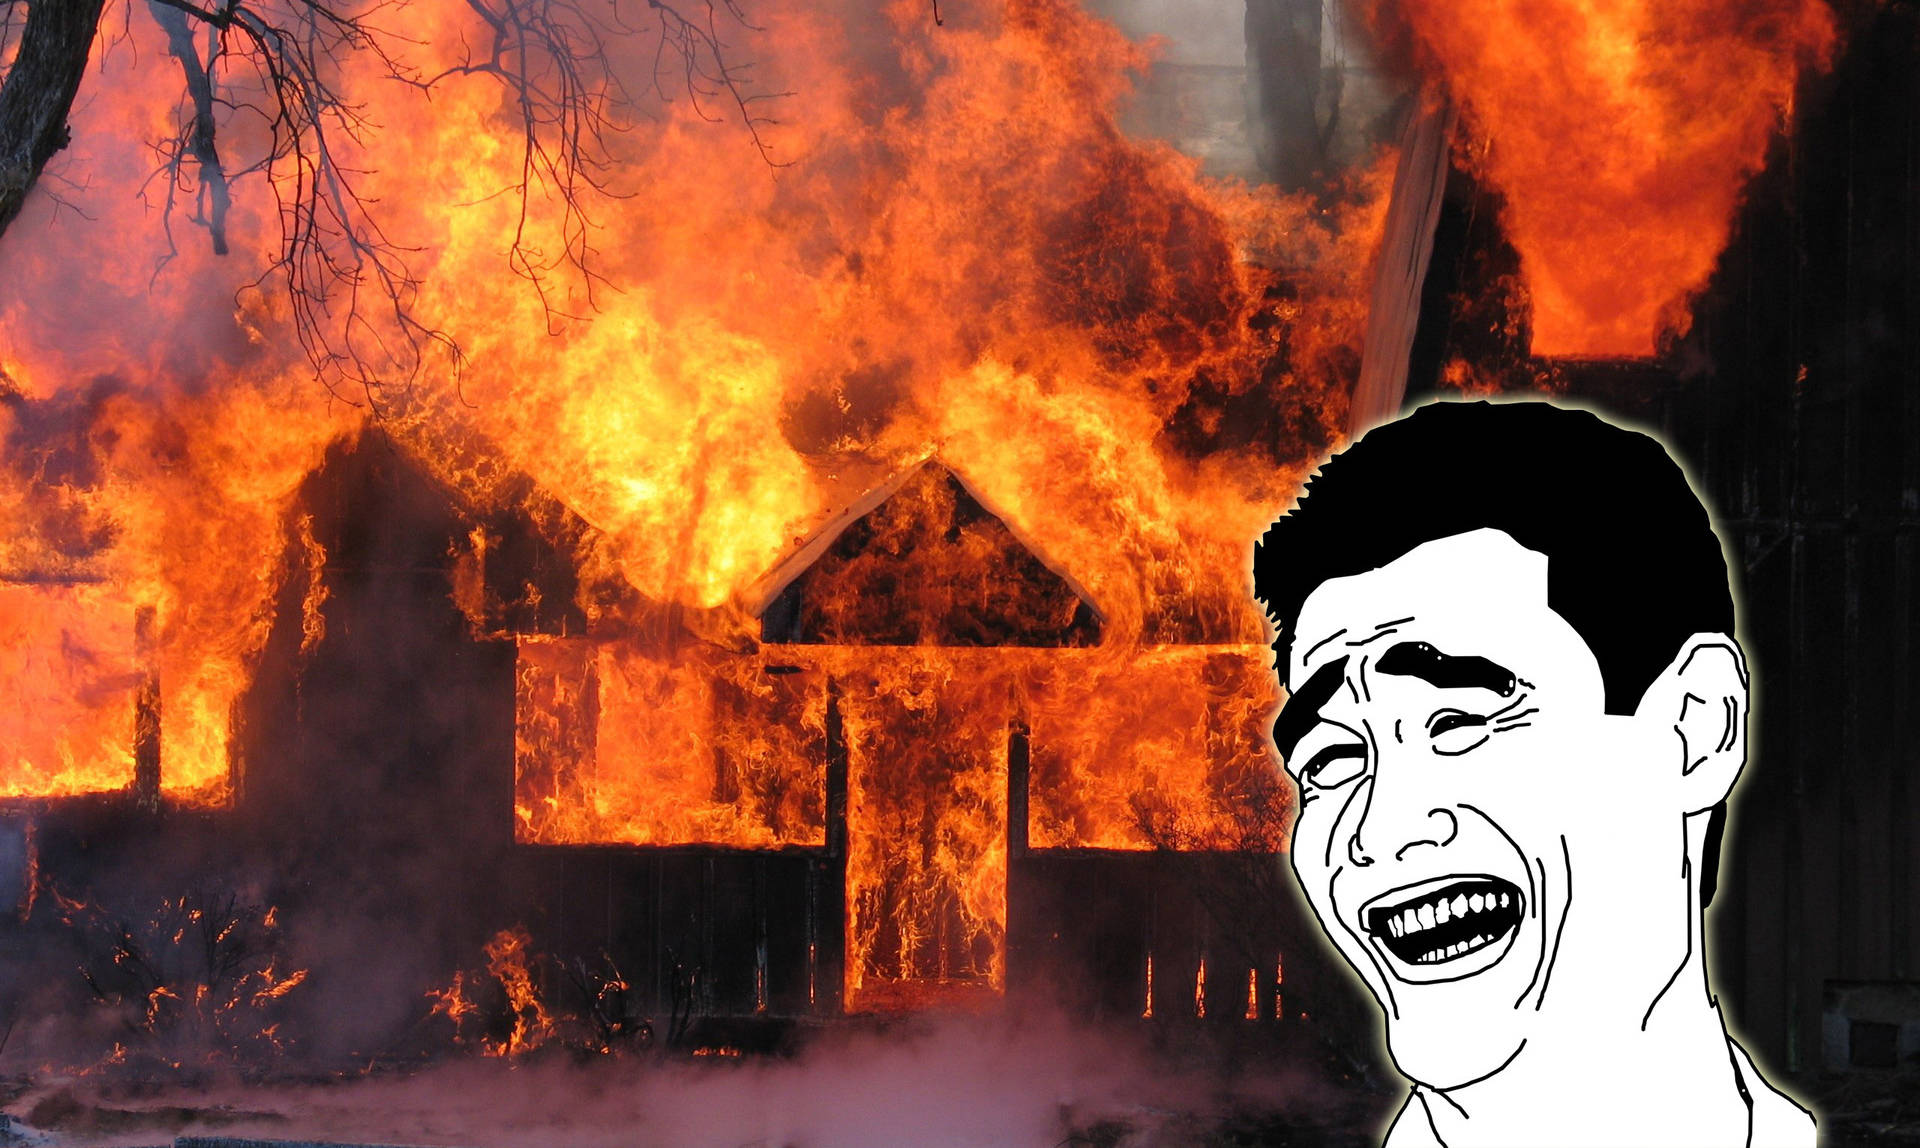 Black and white smiling Yao Ming face meme watching a burning house wallpaper.